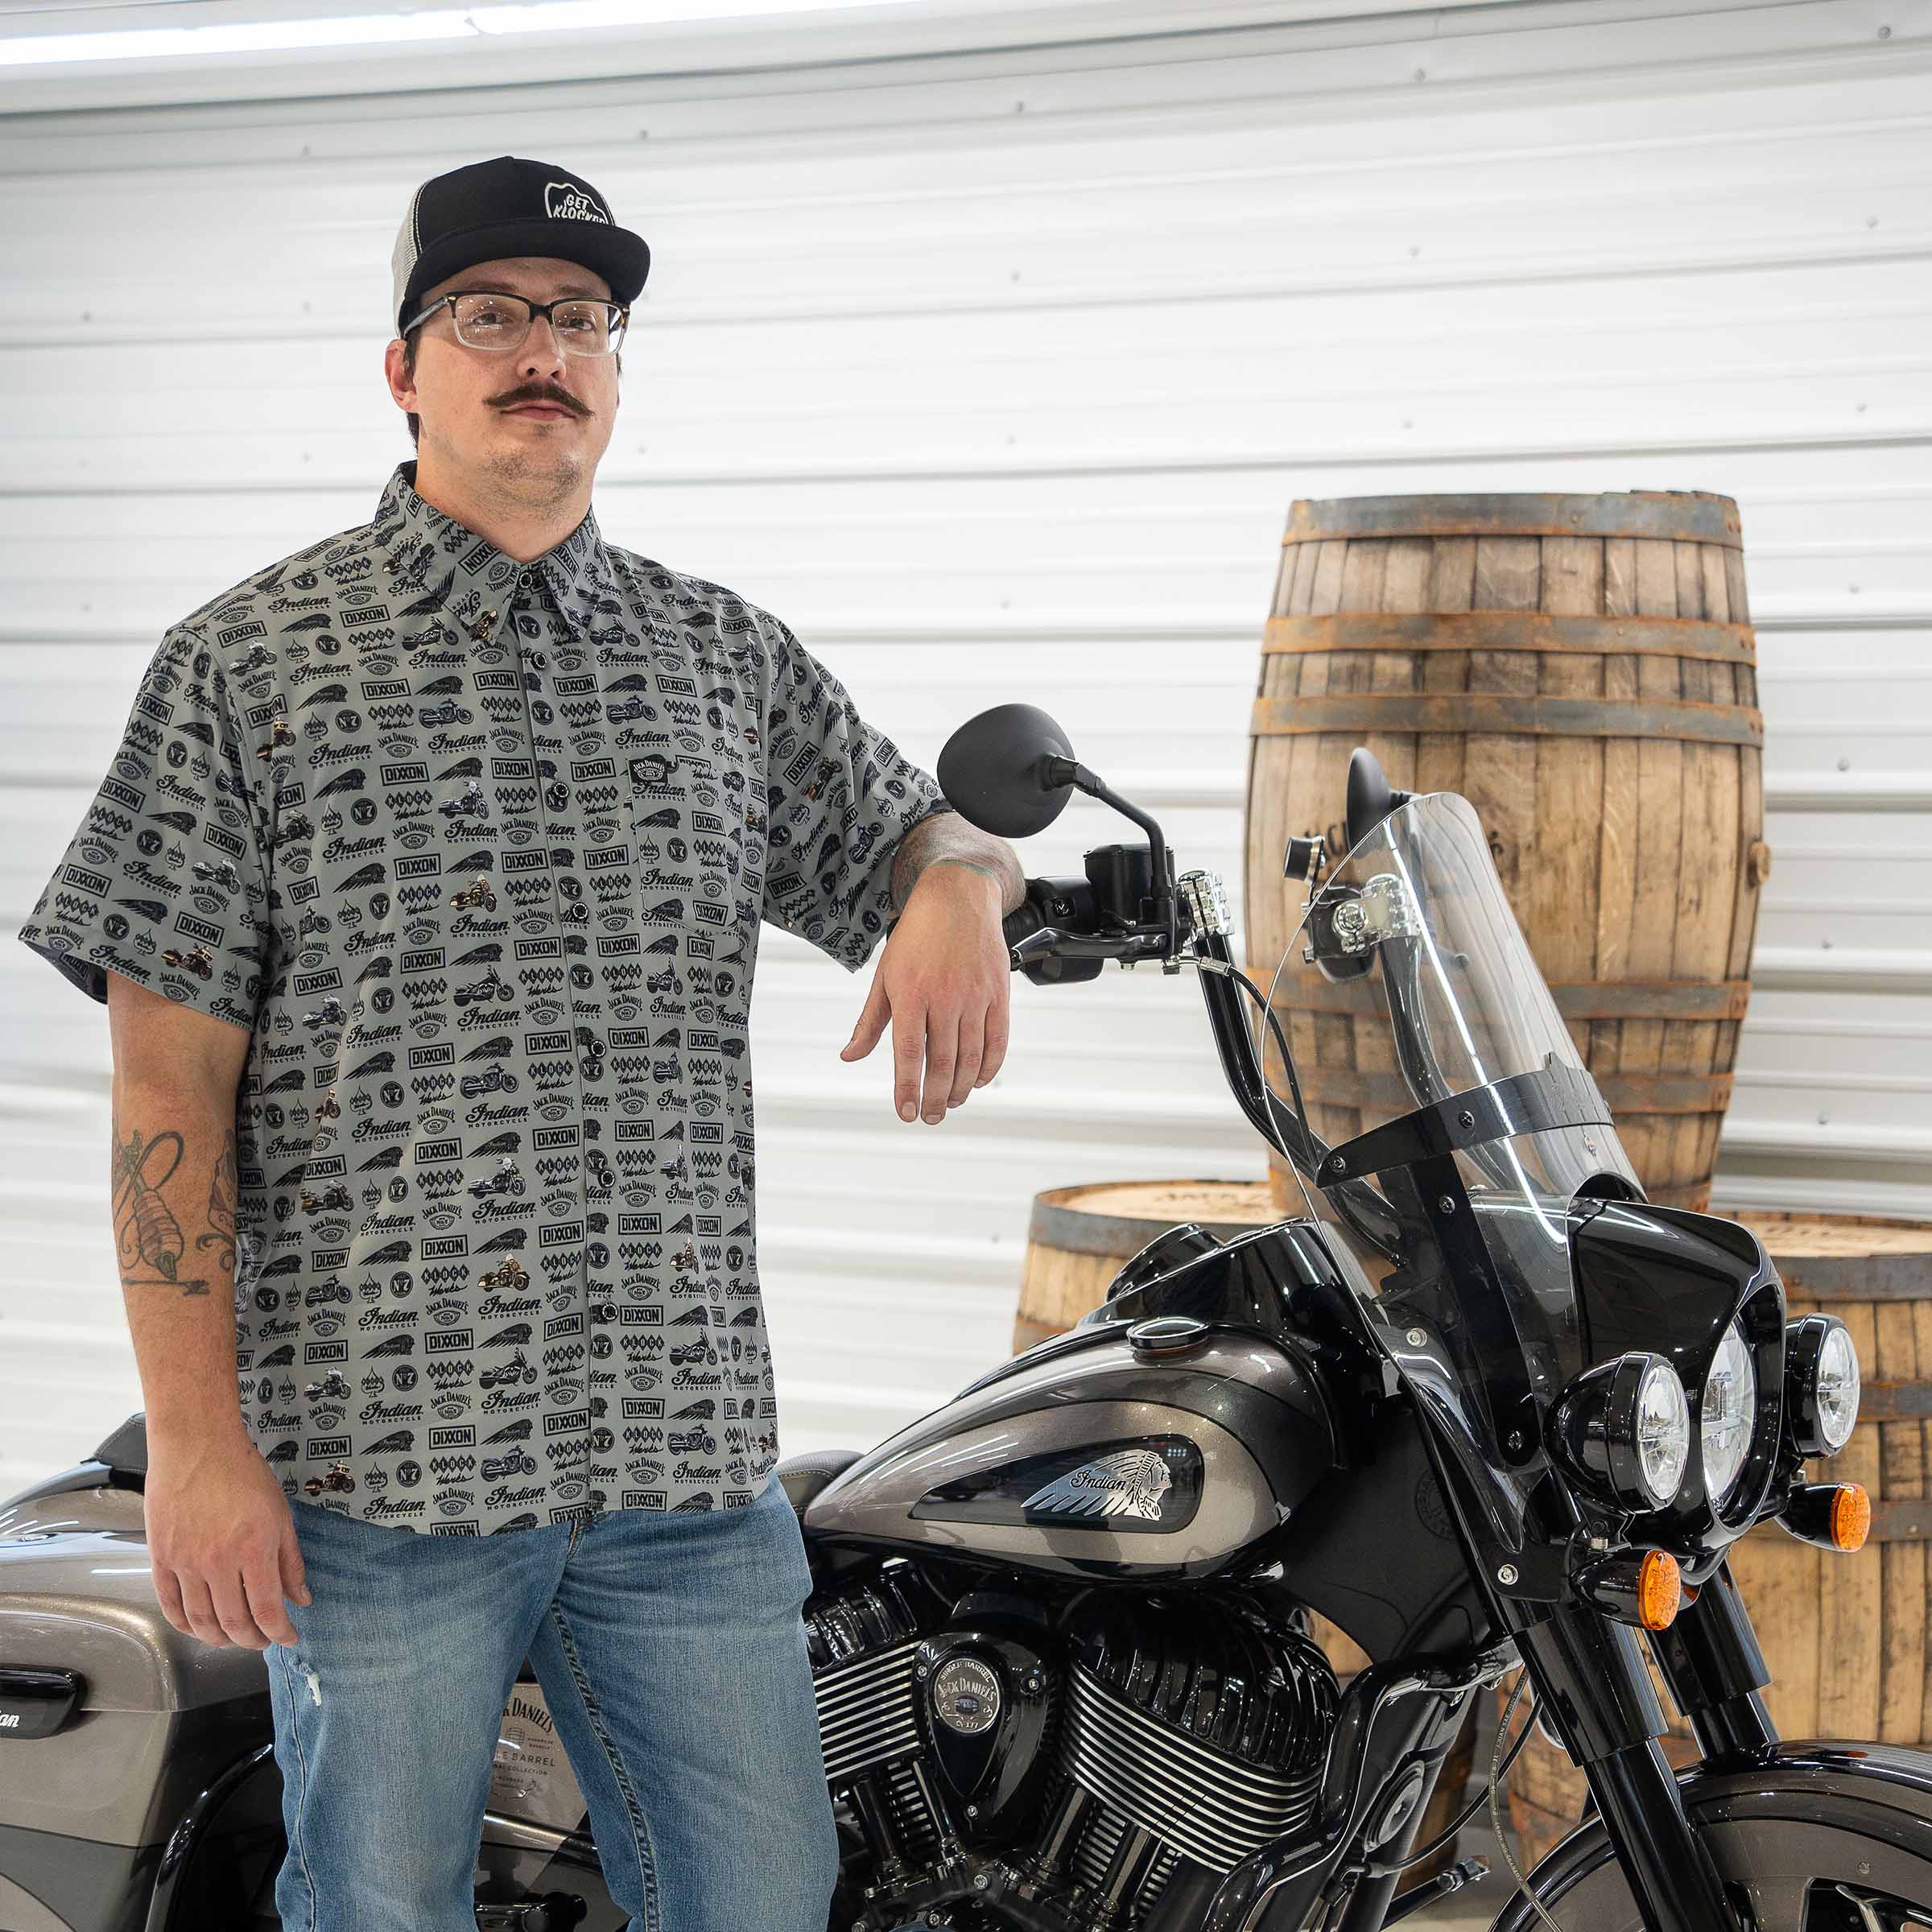 Limited Edition Jack Daniel's x Indian Motorcycle x Klock Werks - Dixxon Party Shirt (Model is wearing an XL)